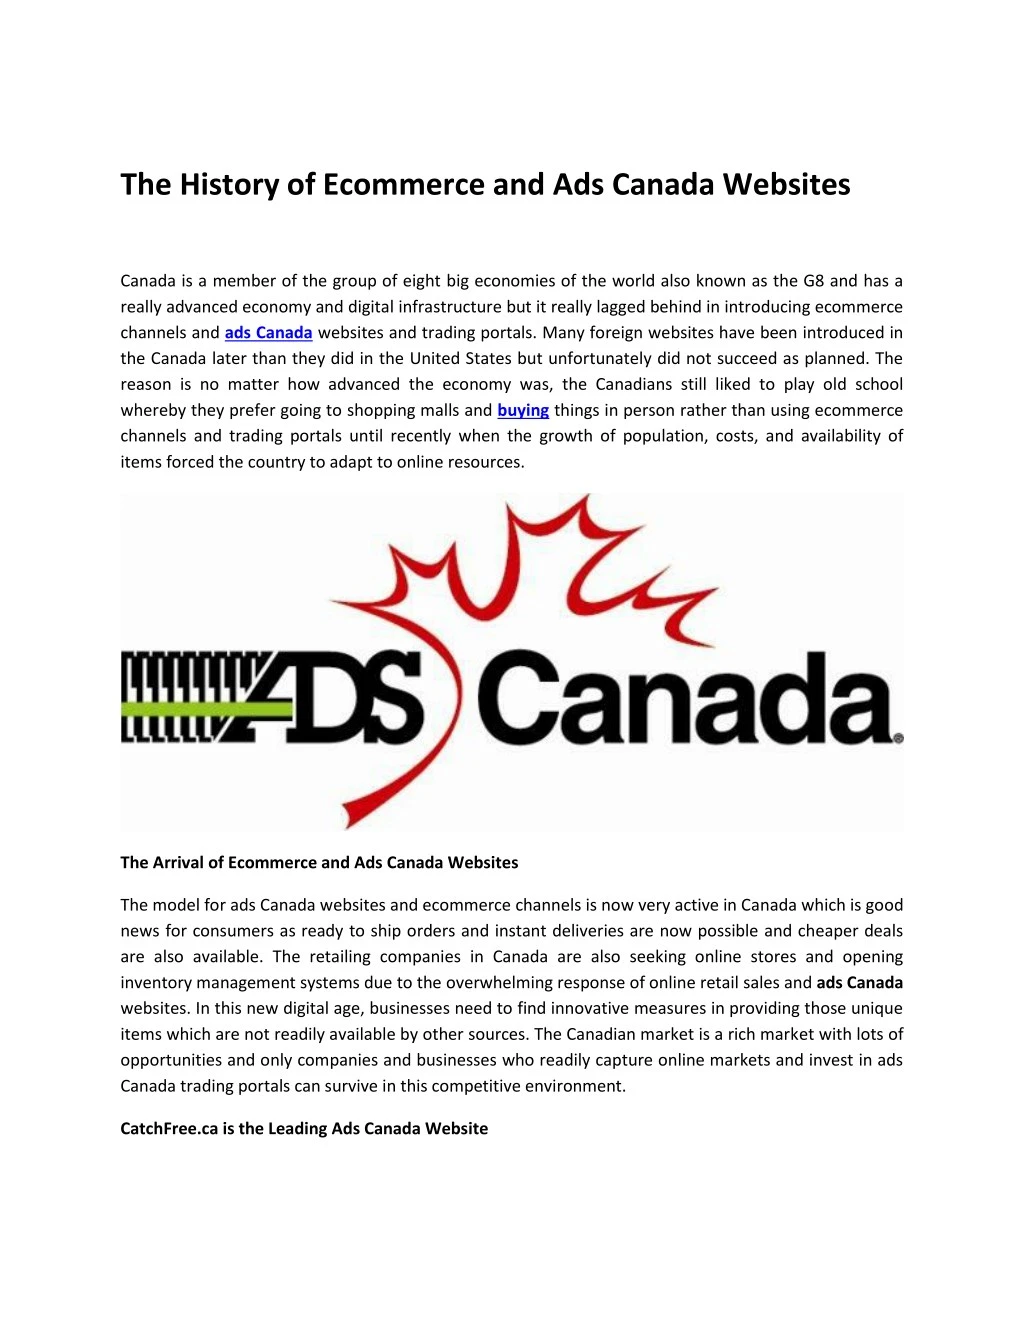 the history of ecommerce and ads canada websites